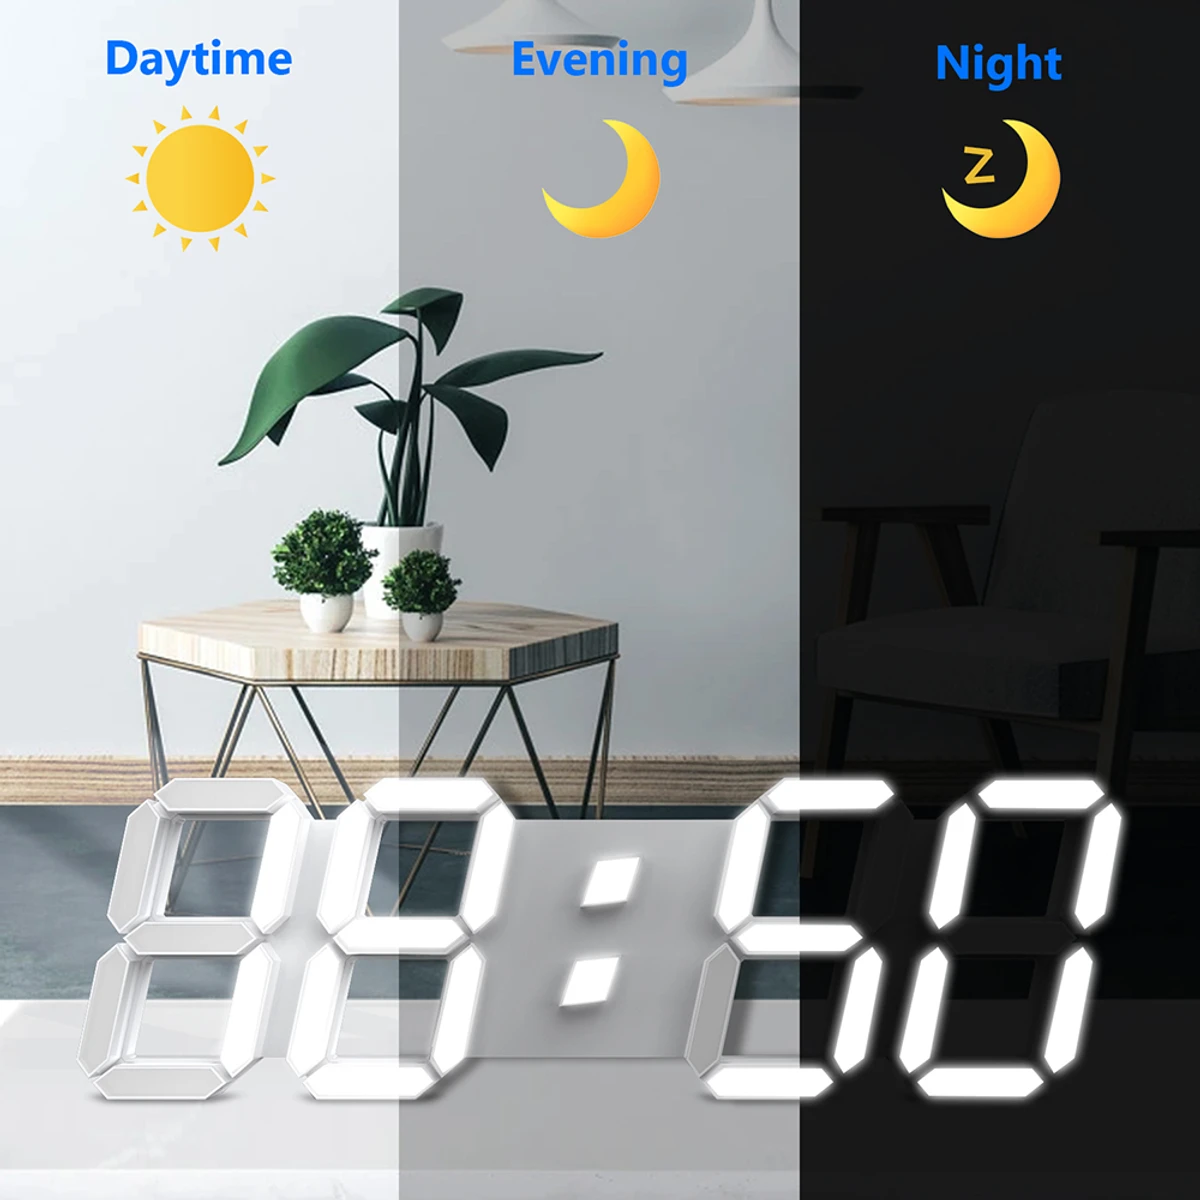 3D Digital Wall Clock LED Table Clock Time Alarm Temperature Date Sound Control Night Light With Remote Control Clock